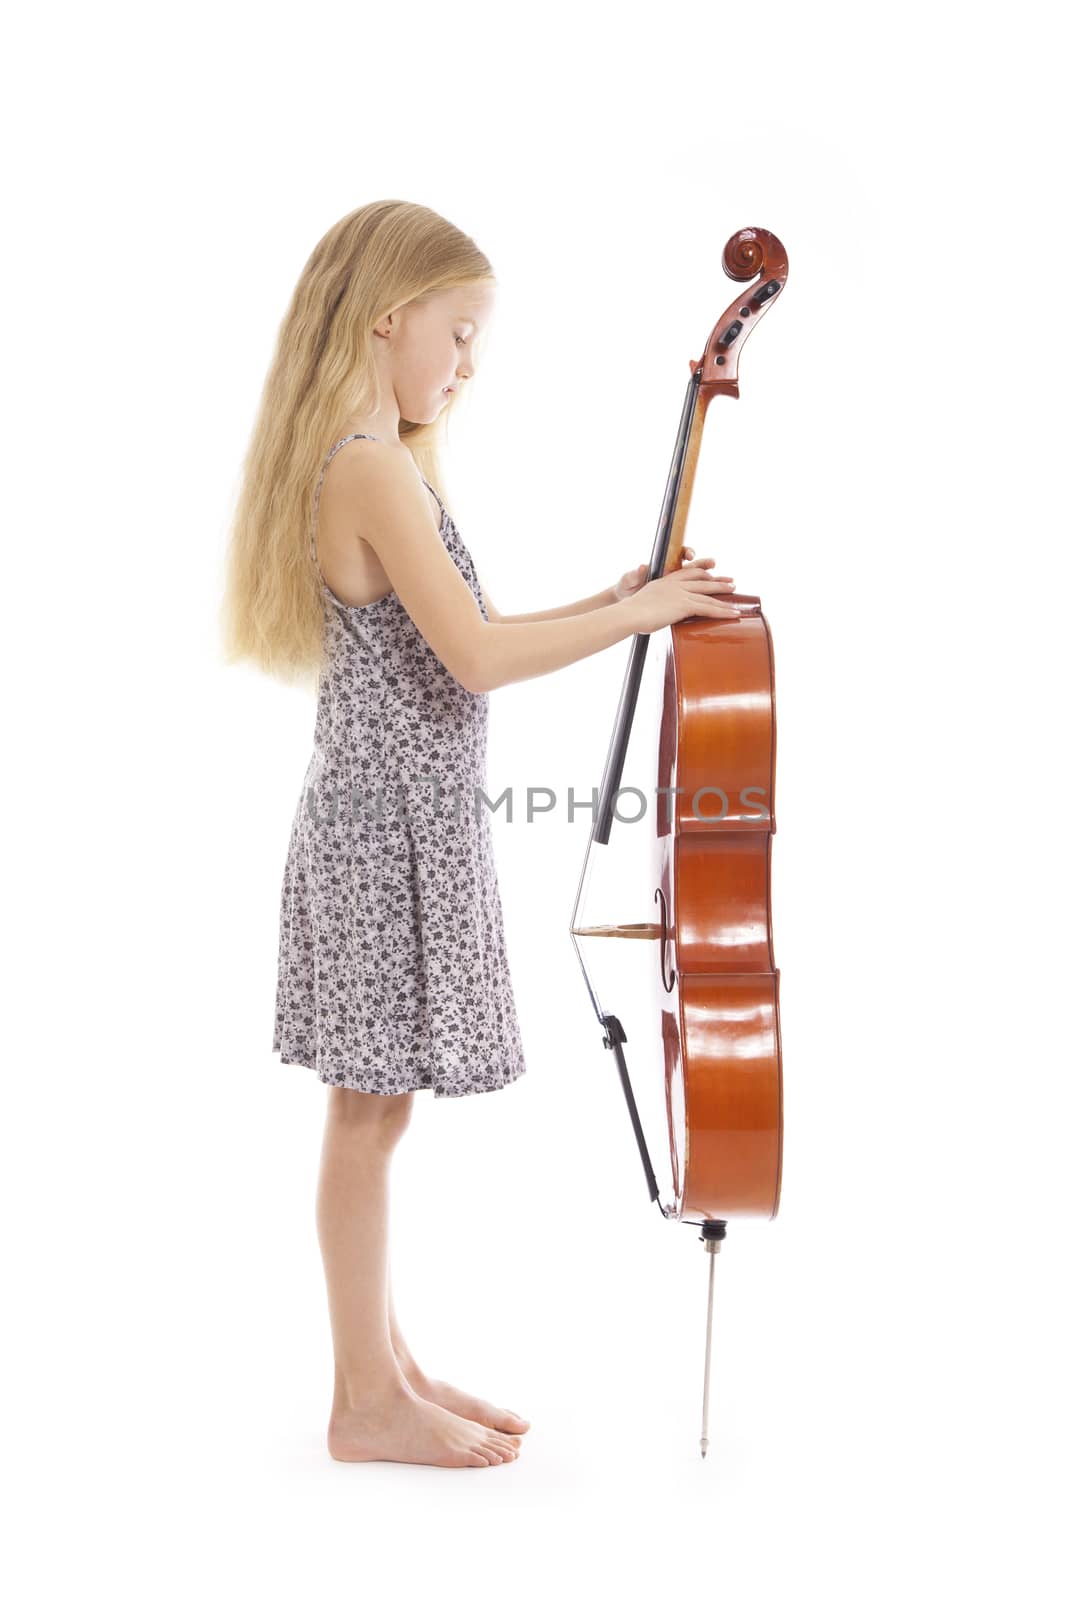 young girl in dress and her cello by ahavelaar